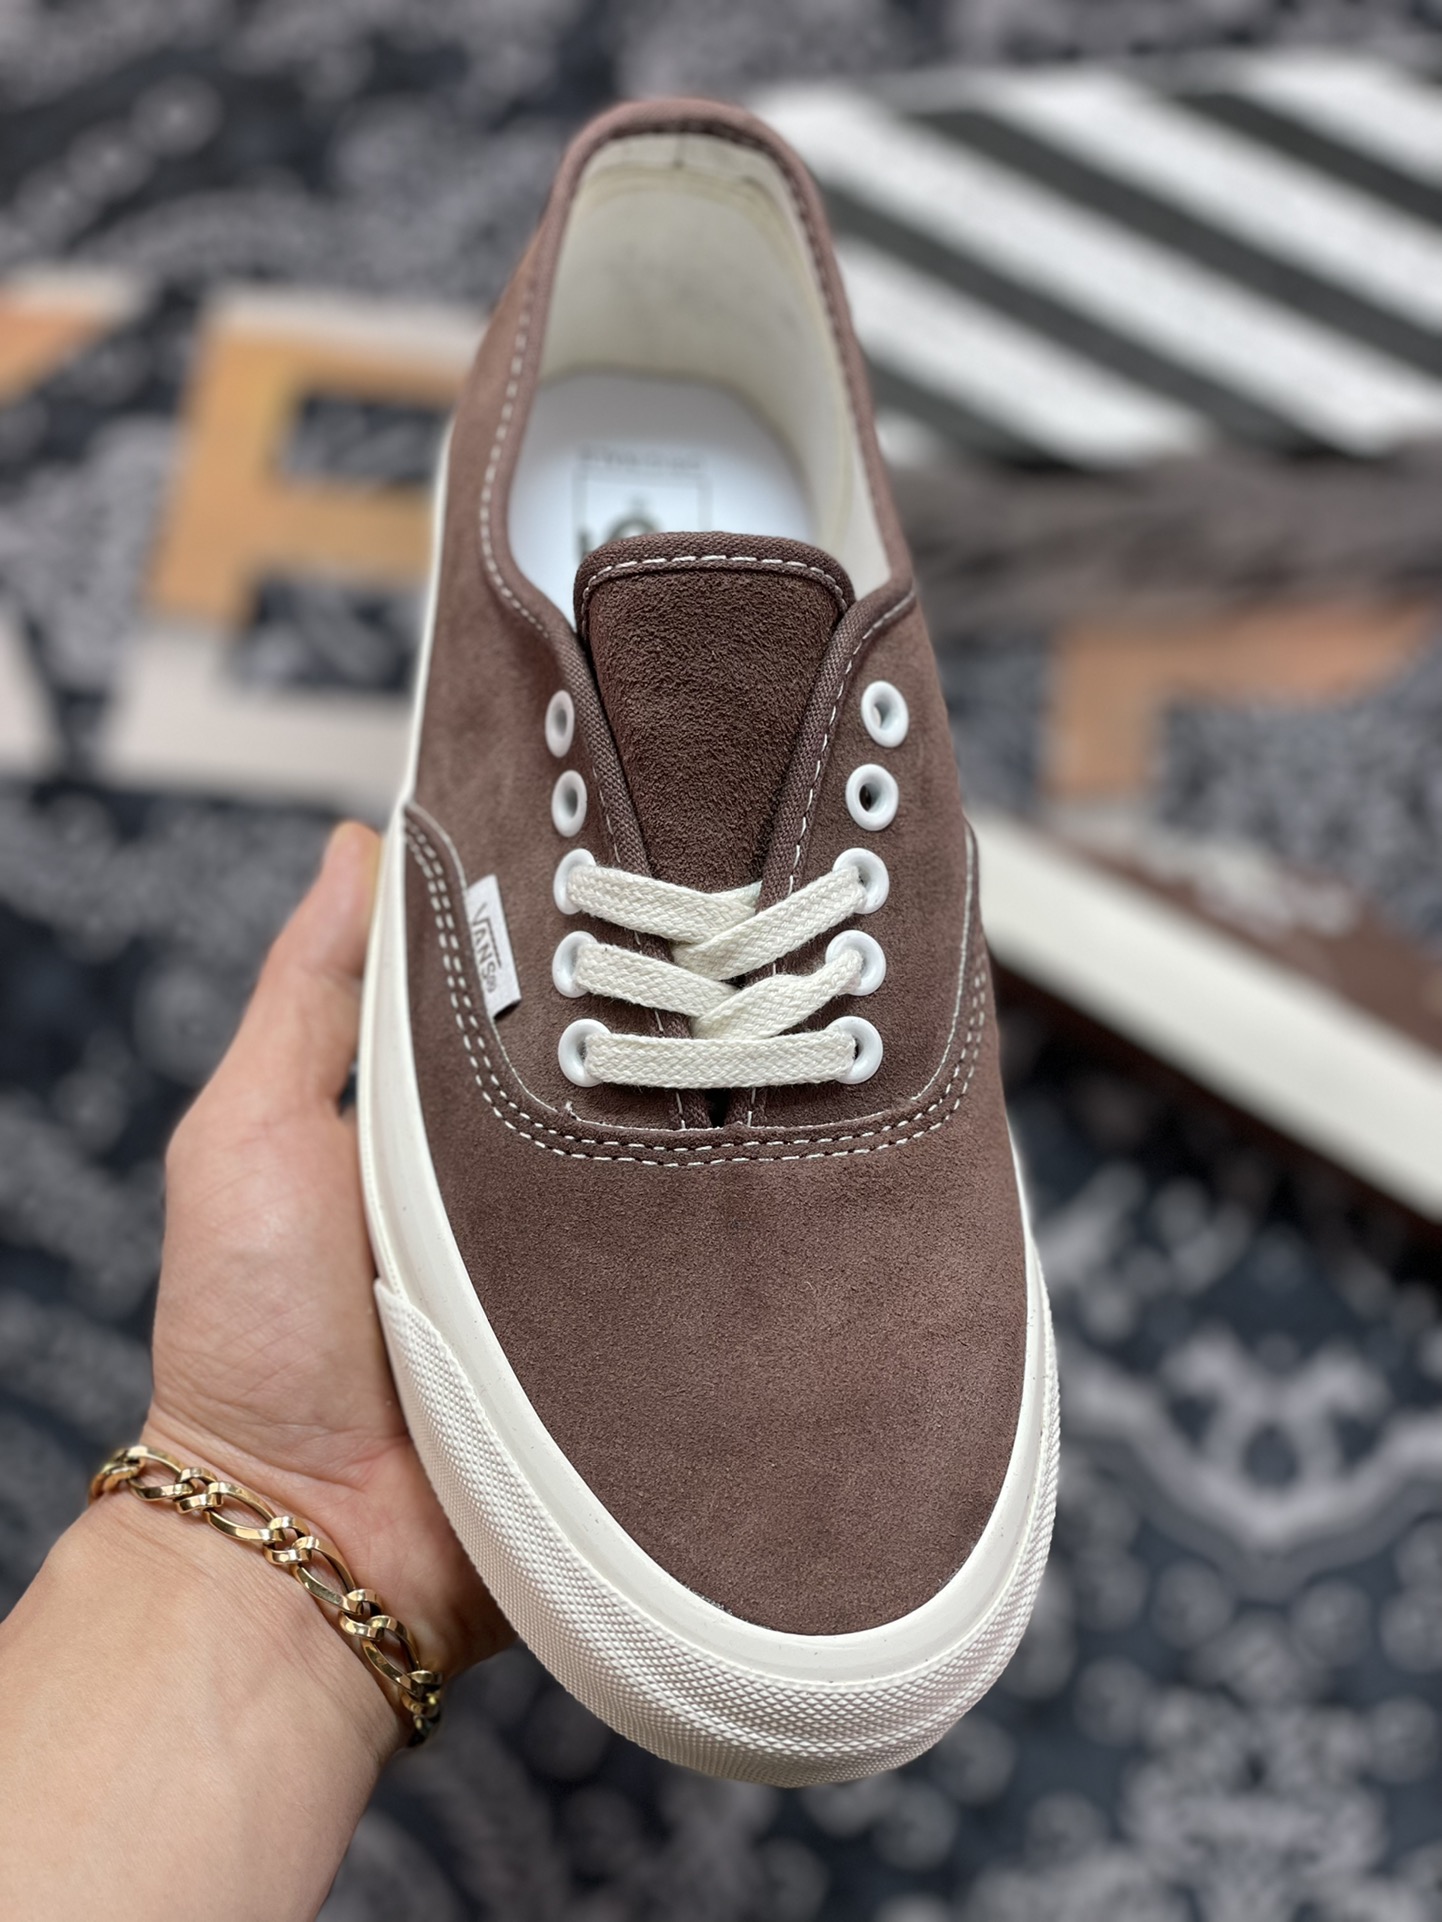 Vans Authentic classic Anaheim fully suede retro low-top high-end vulcanized canvas shoes